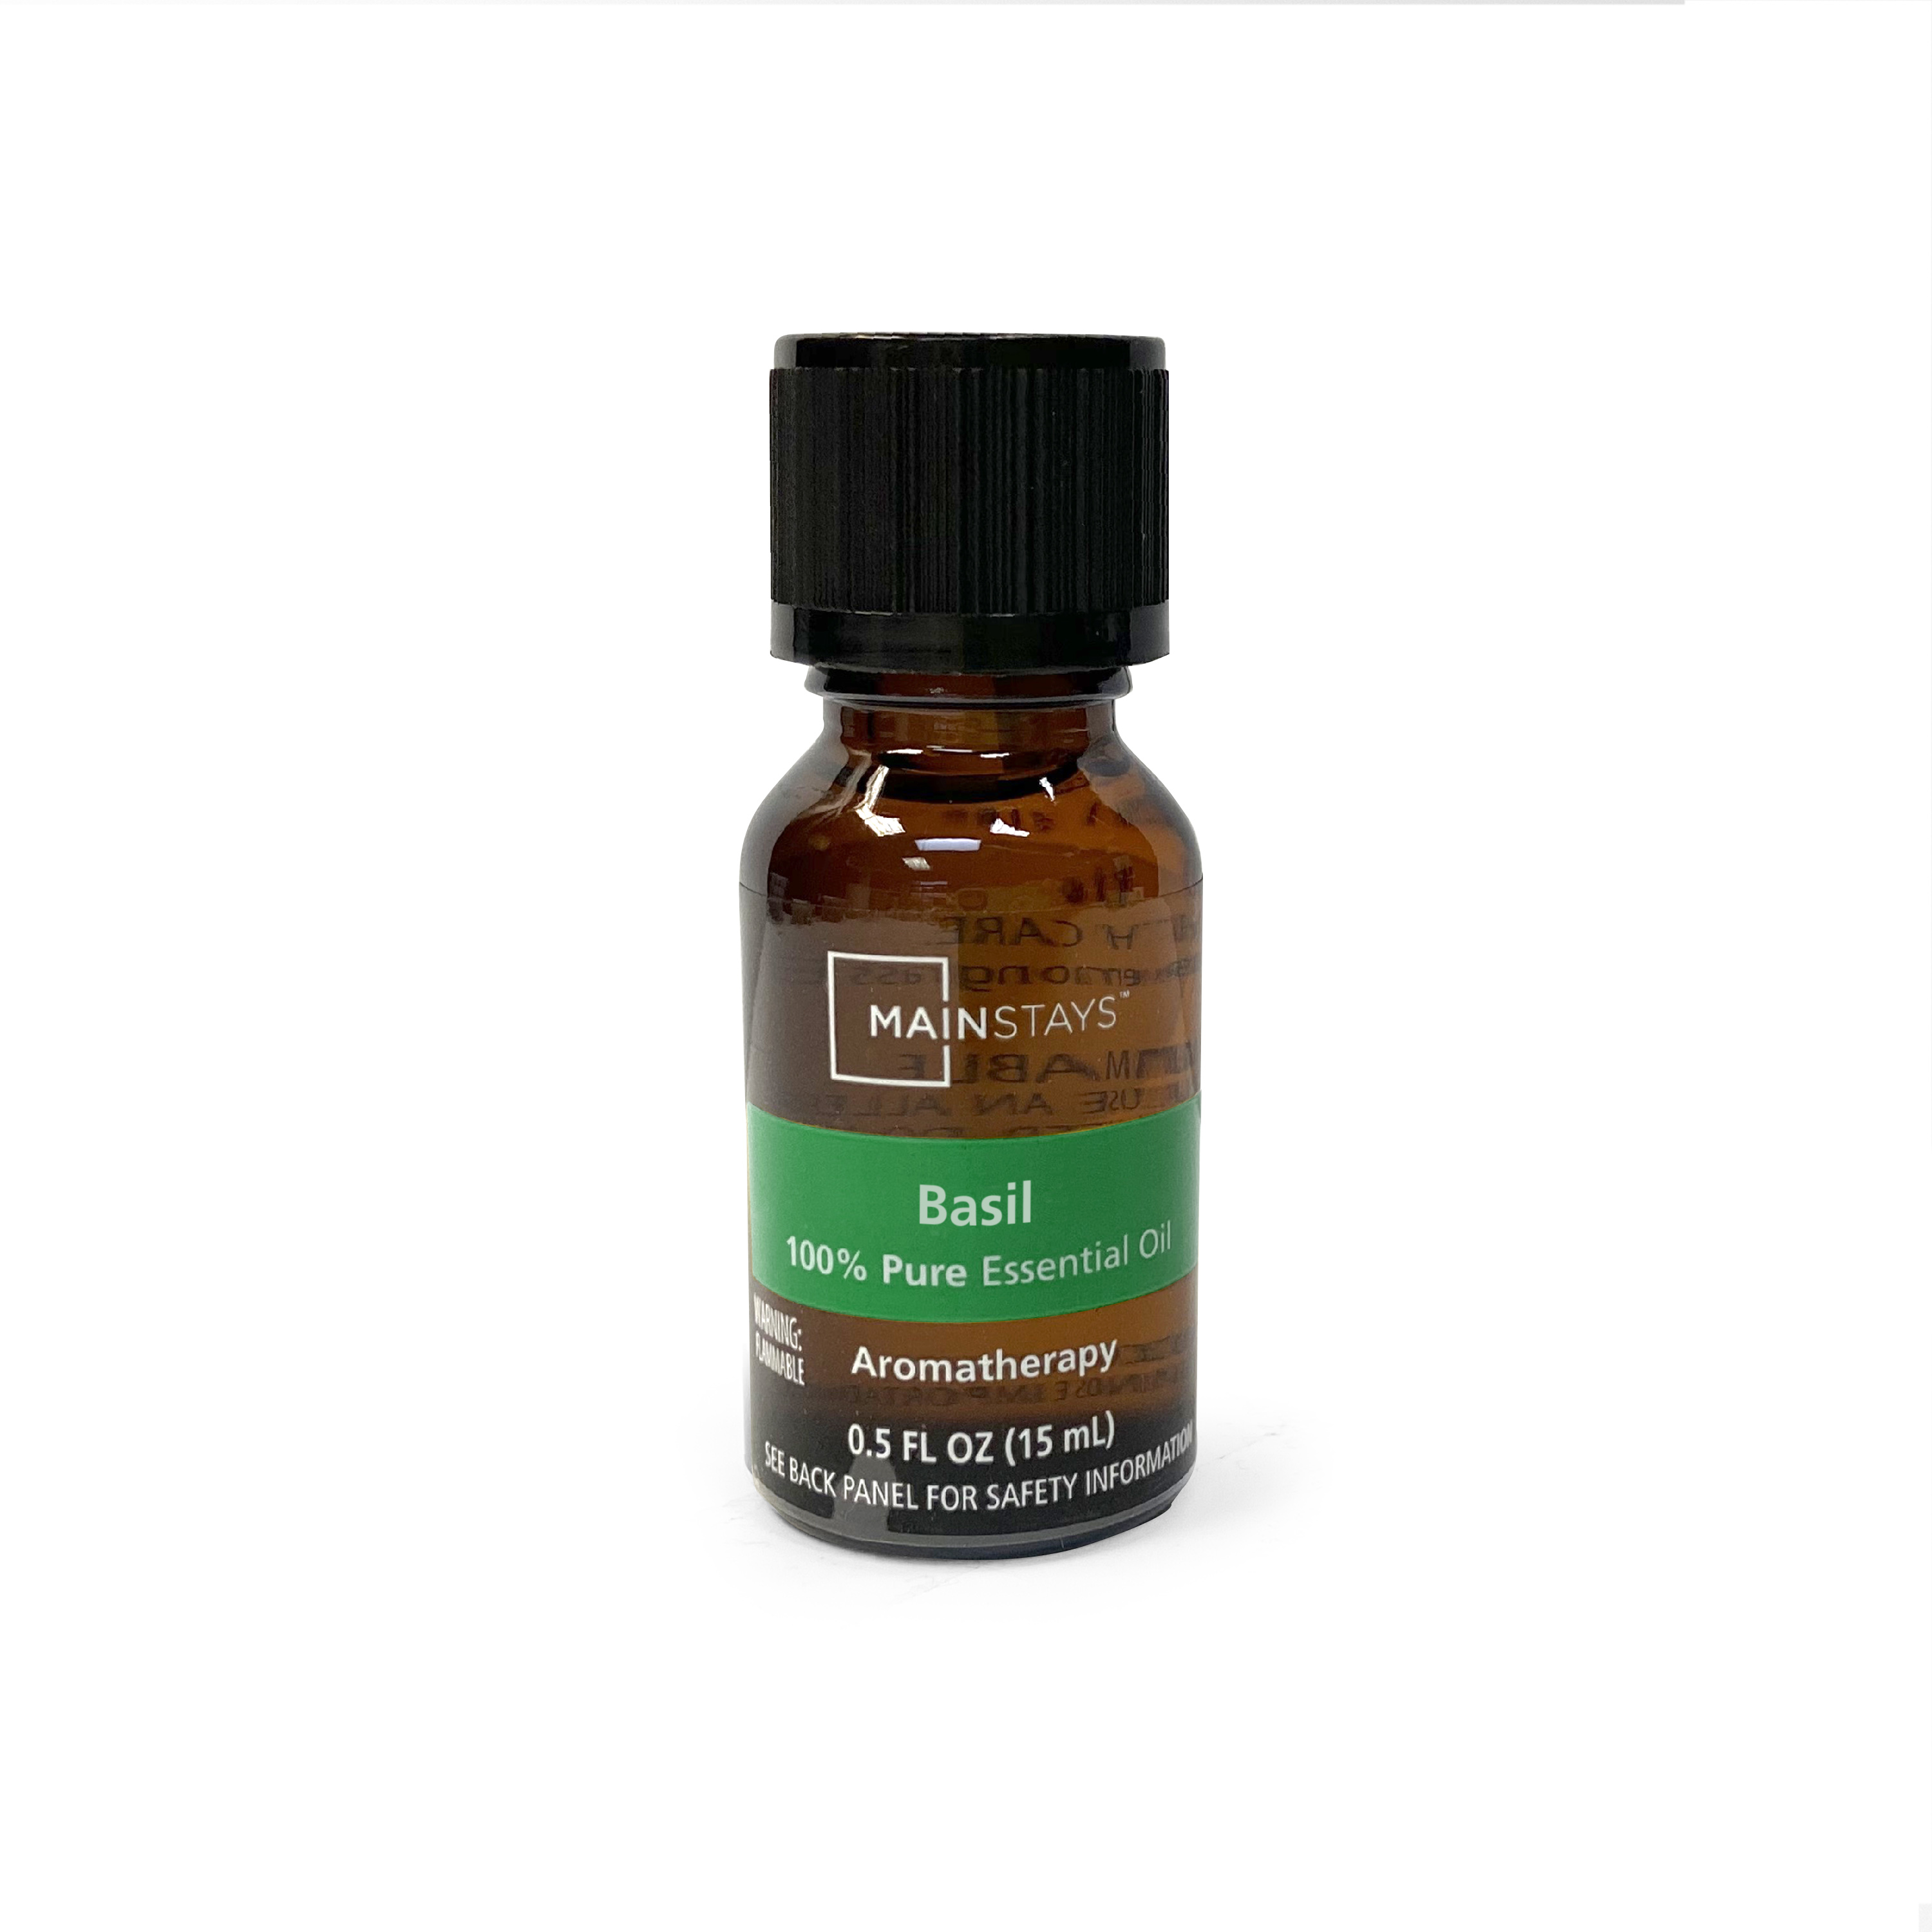 Mainstays, Basil 100% Pure Essential Oil 0.5 fl oz Amber Glass Bottle, Aromatherapy - image 4 of 4